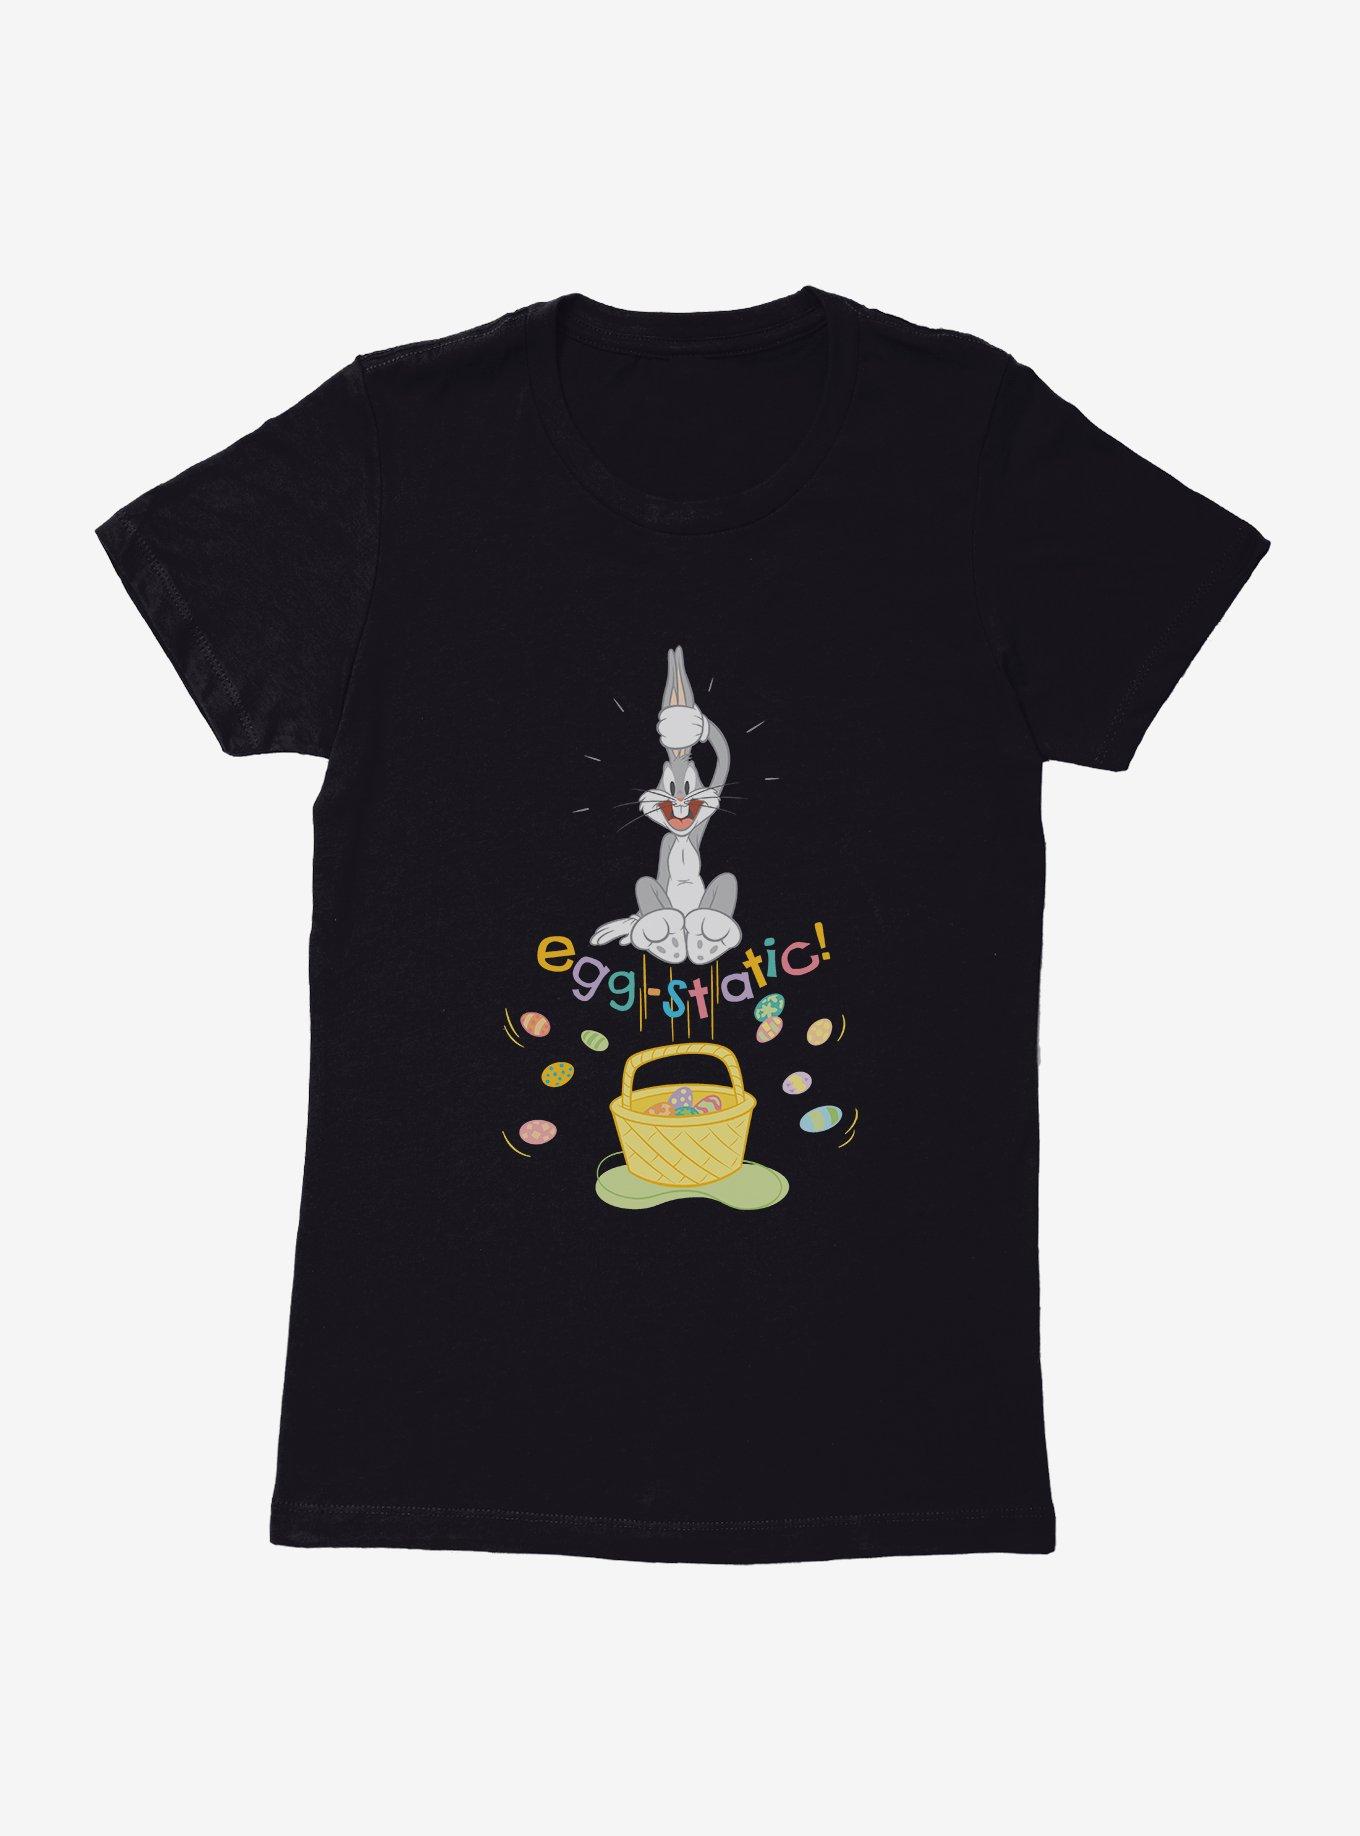 Looney Tunes Easter Bugs Bunny Egg-Static! Womens T-Shirt, BLACK, hi-res